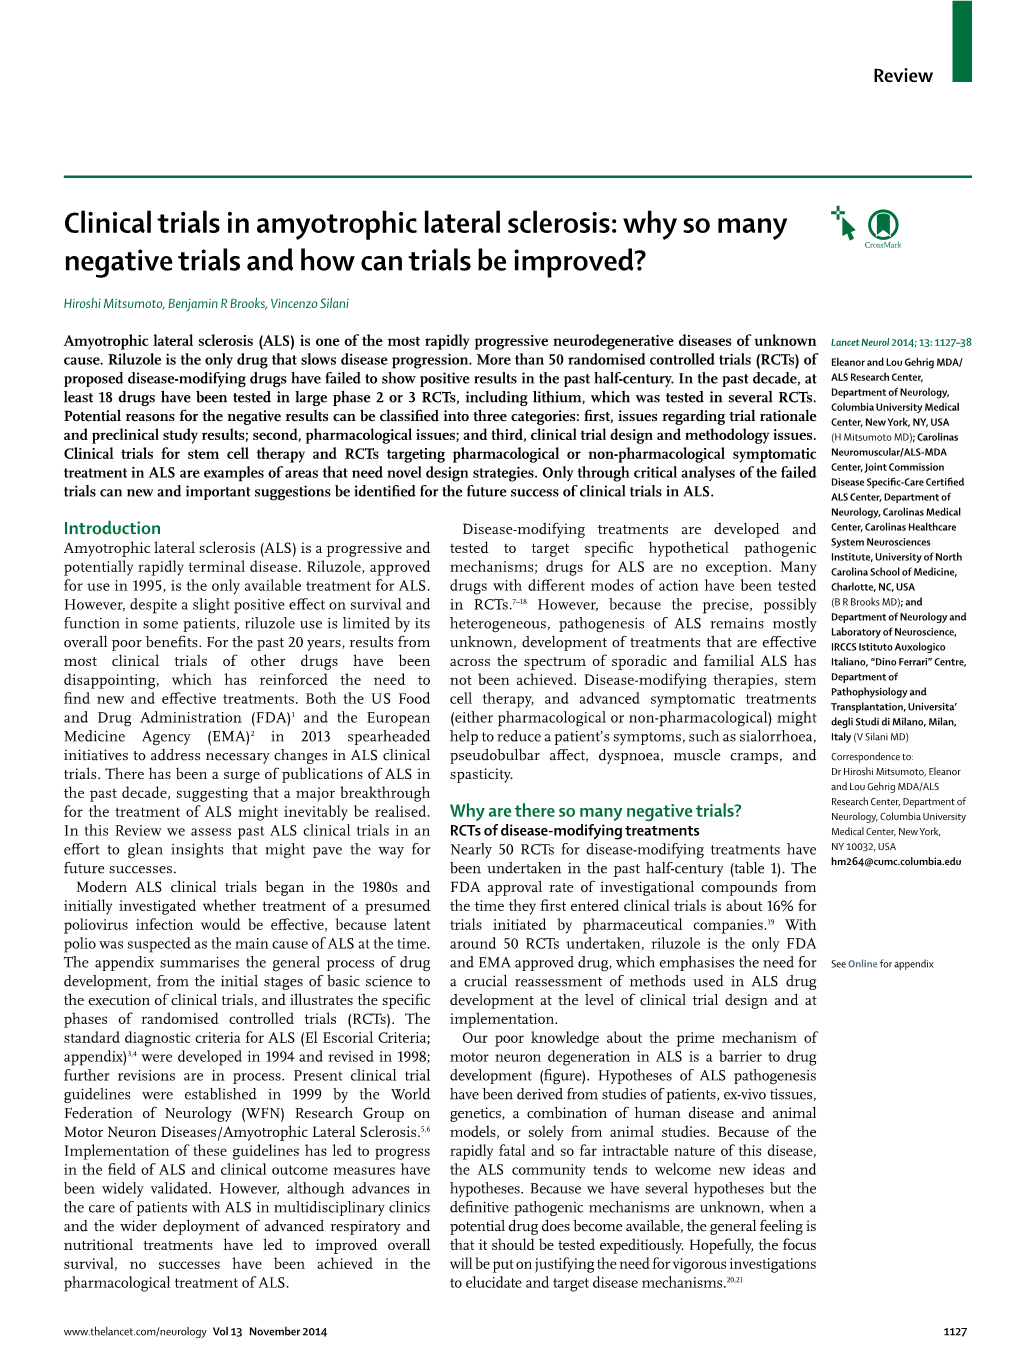 Clinical Trials in Amyotrophic Lateral Sclerosis: Why So Many Negative Trials and How Can Trials Be Improved?